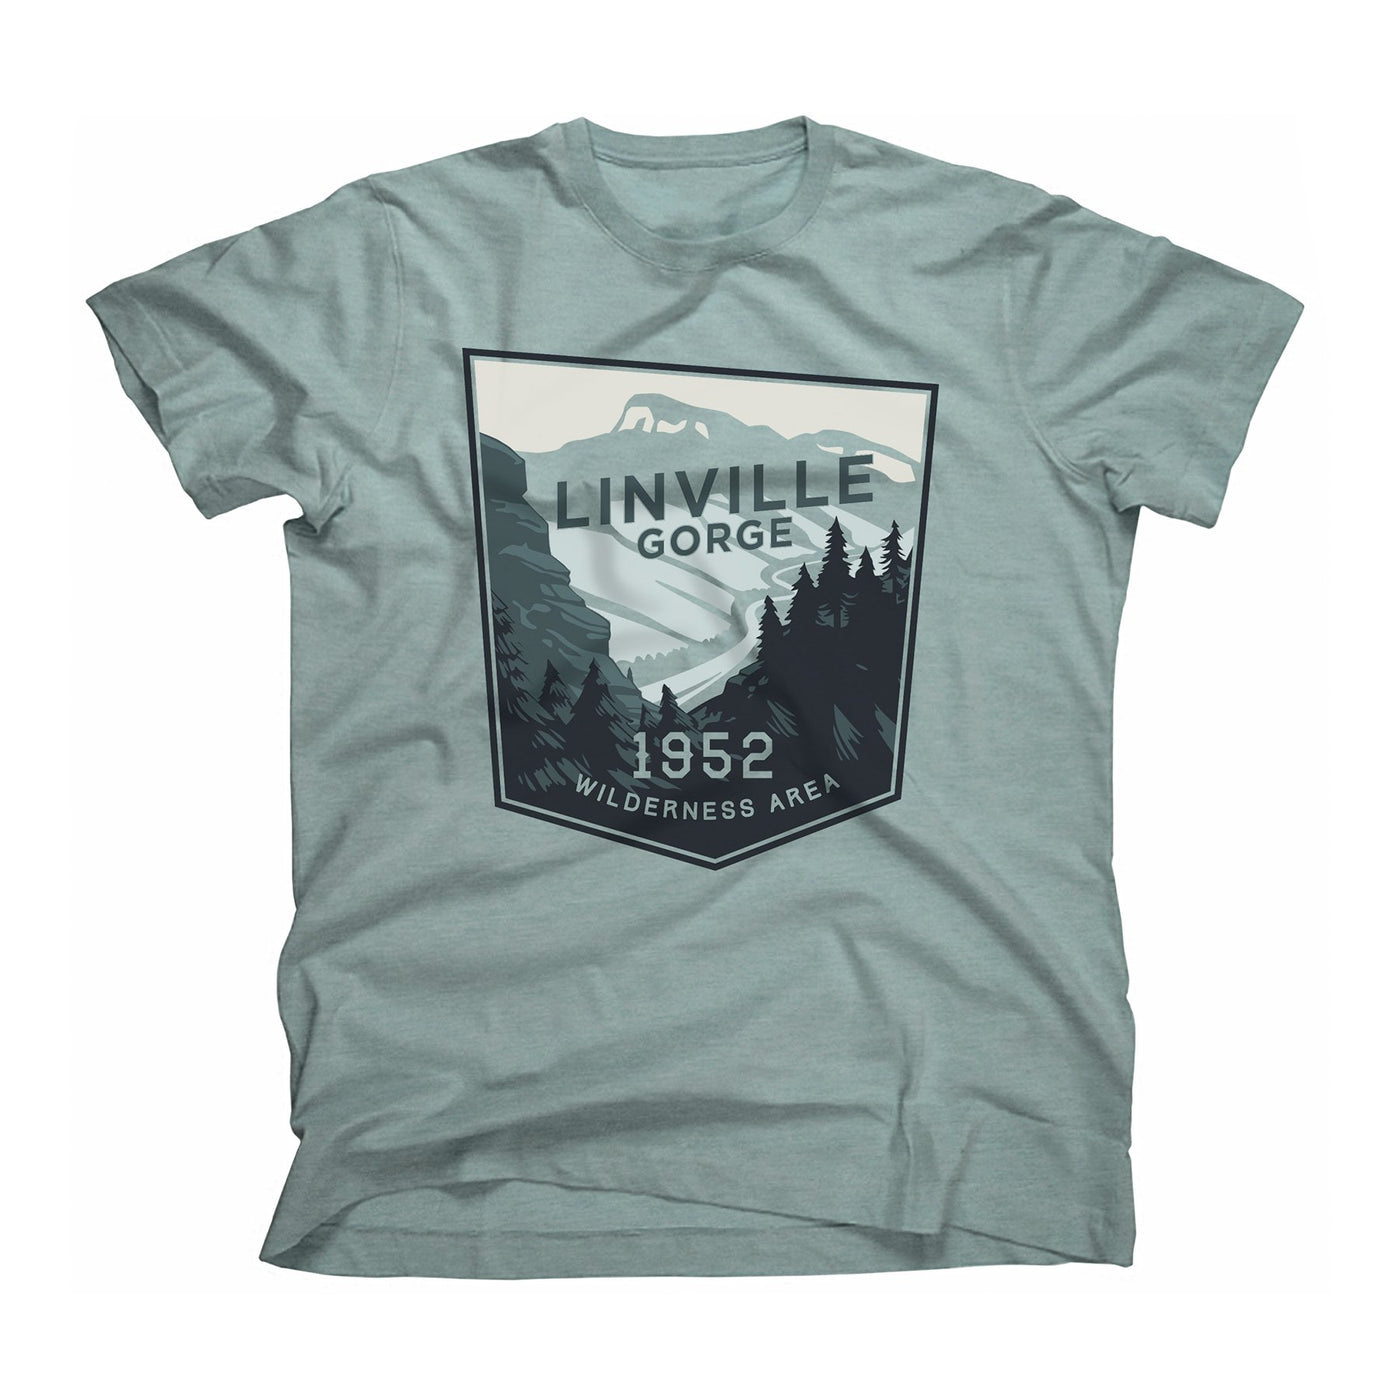 The Landmark Project Linville Gorge Tee